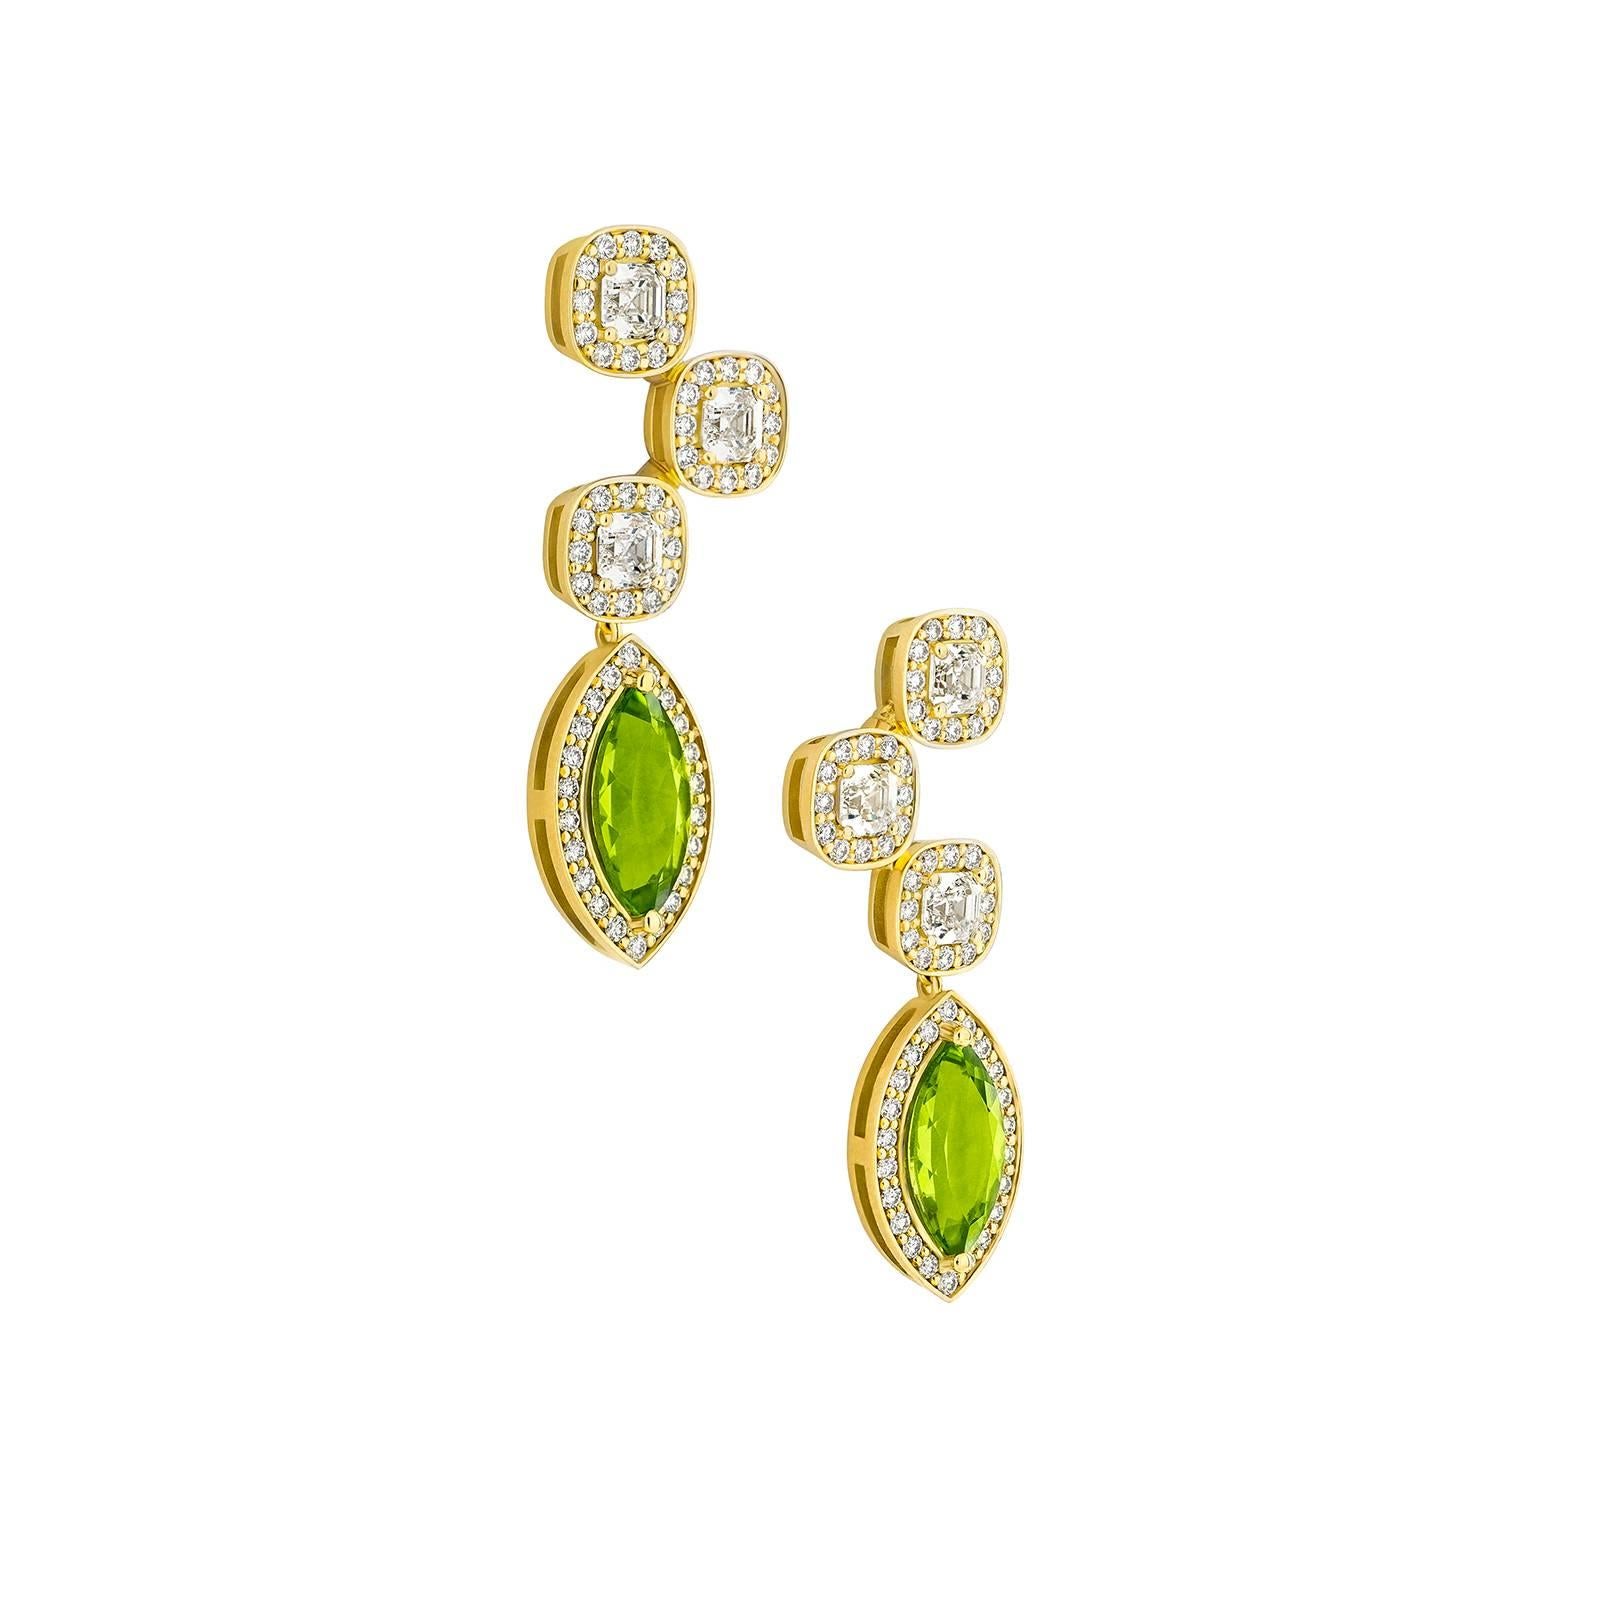 Yellow Gold Pave Set White Diamond Asscher Green Peridot Drop Earrings  In New Condition For Sale In Amsterdam, Noord-Holland